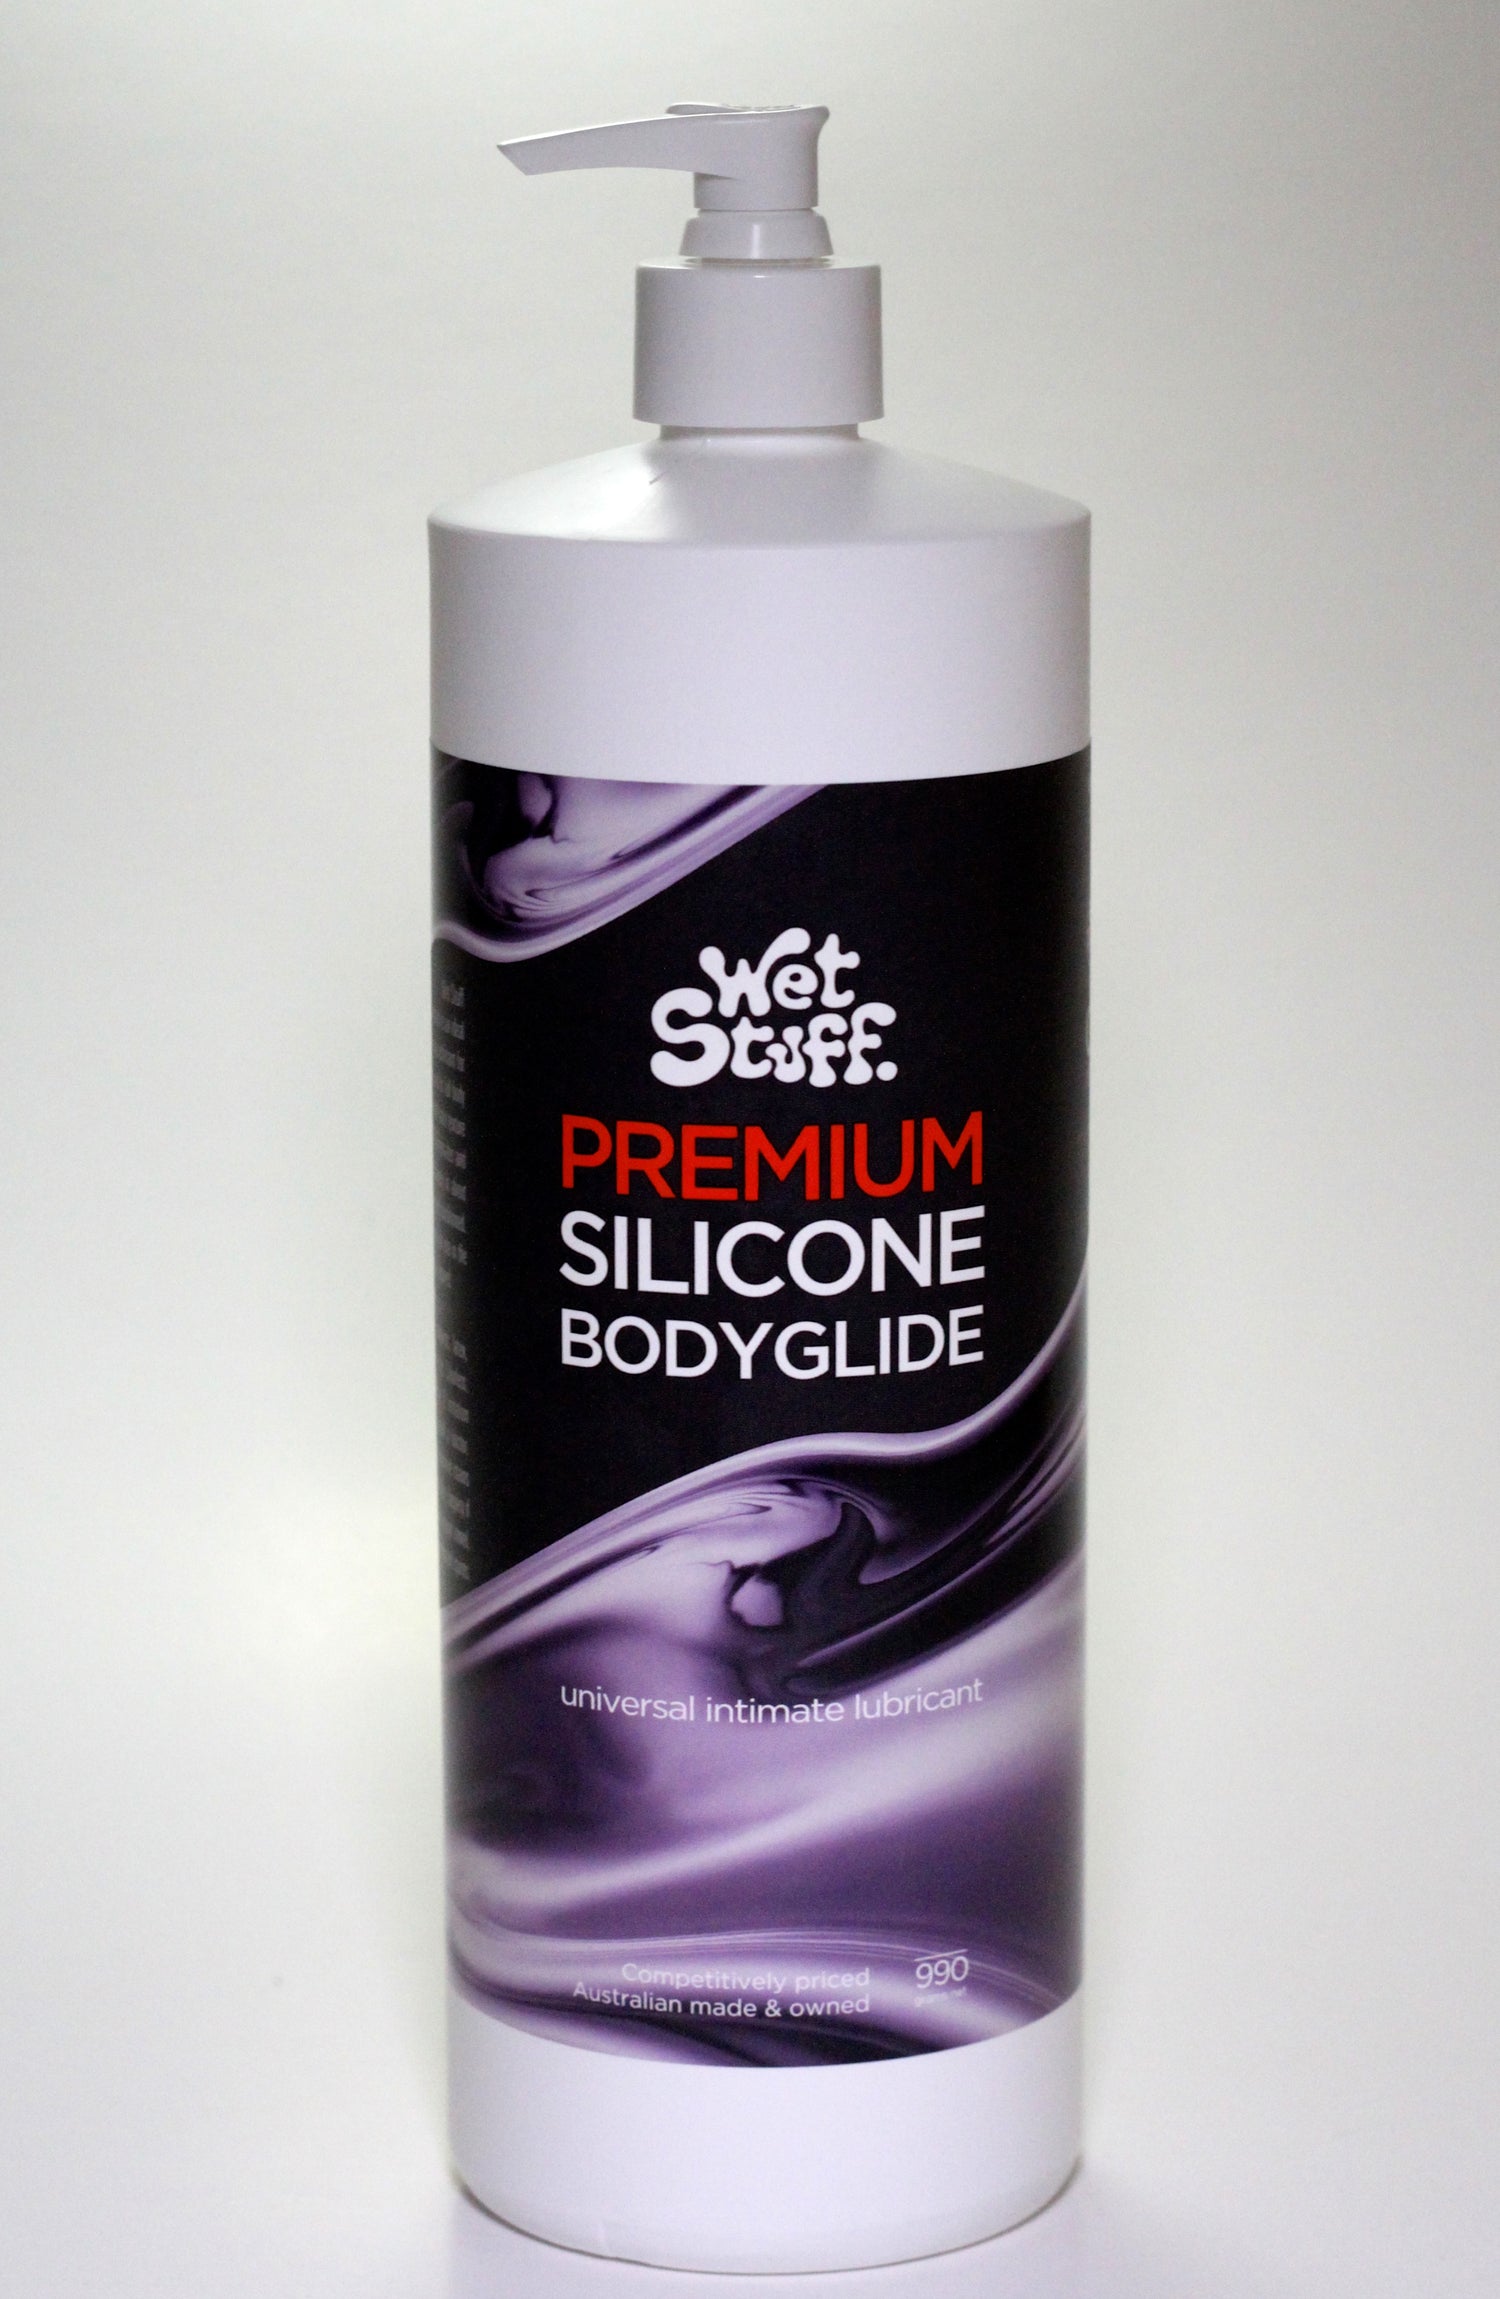 Wet Stuff Premium Silicone Bodyglide 990g Pump Top - Just for you desires